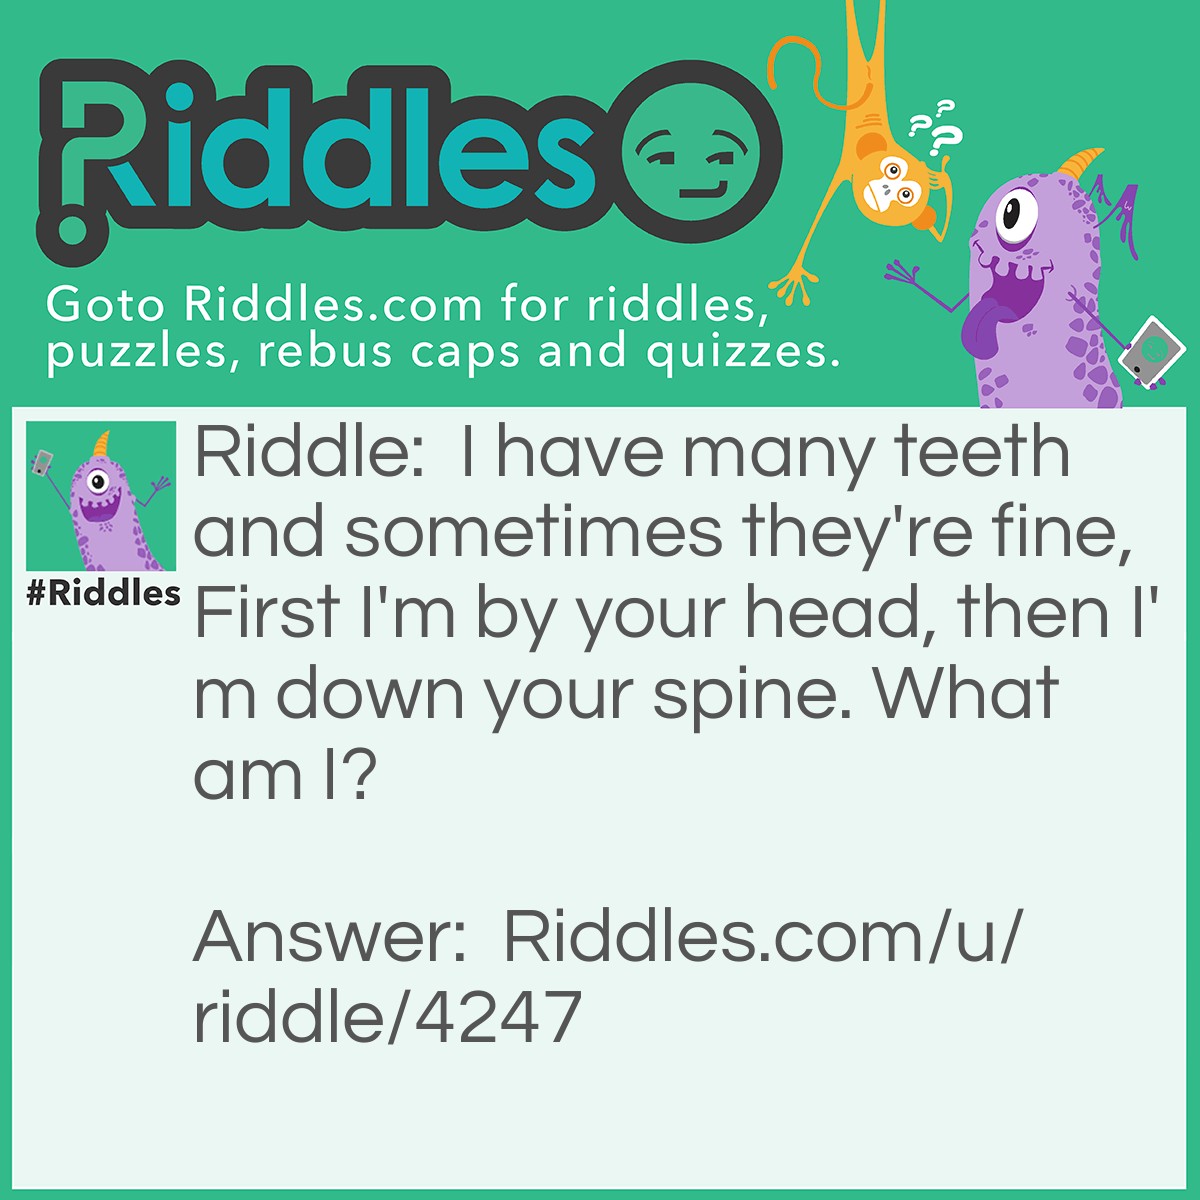 Riddle: I have many teeth and sometimes they're fine, First I'm by your head, then I'm down your spine. What am I? Answer: A comb.